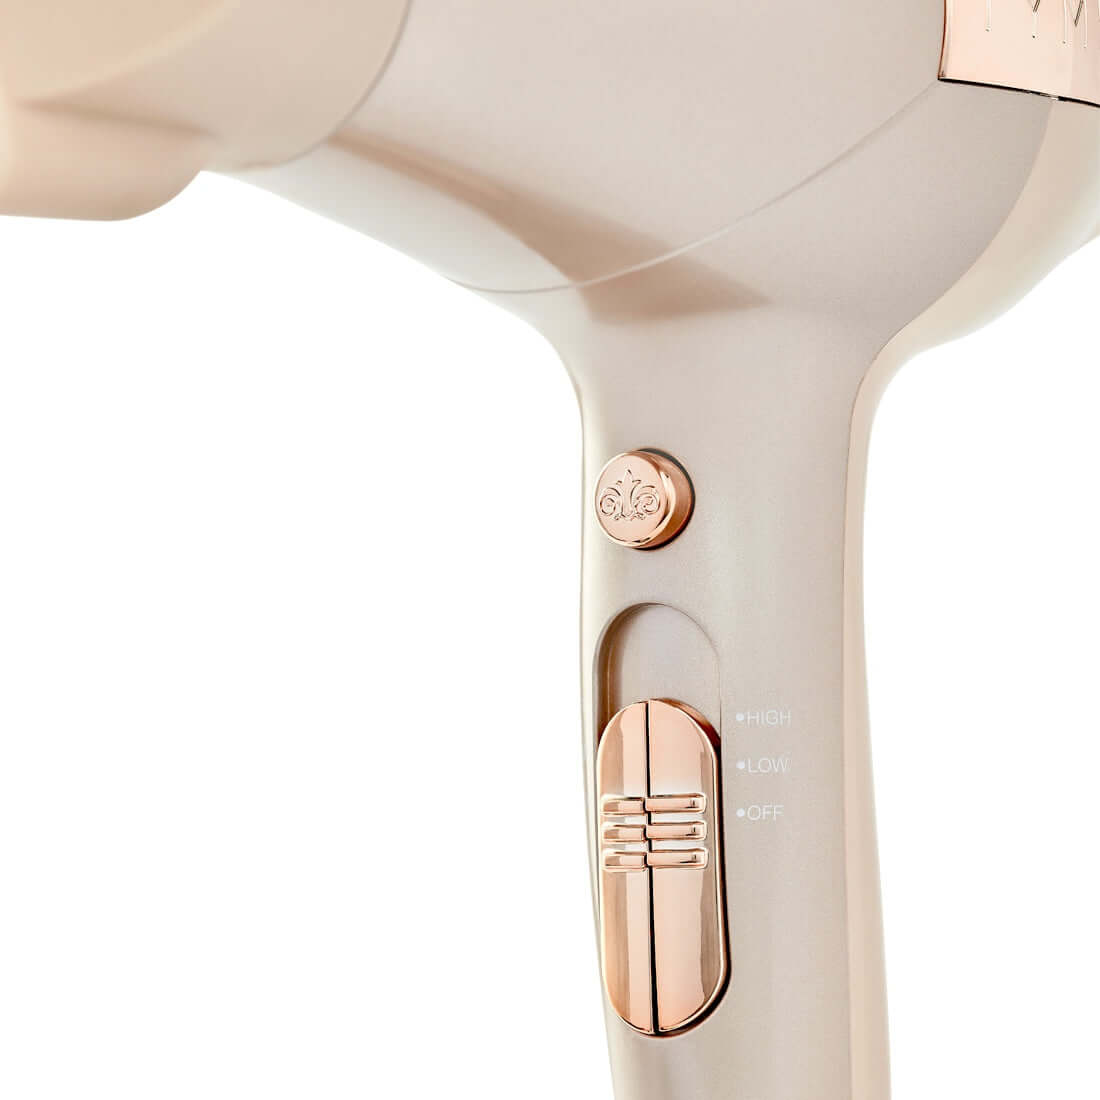 TYME BlowTYME Hair Dryer rose gold heat settings switch, power adjustment switch and cool shot button.